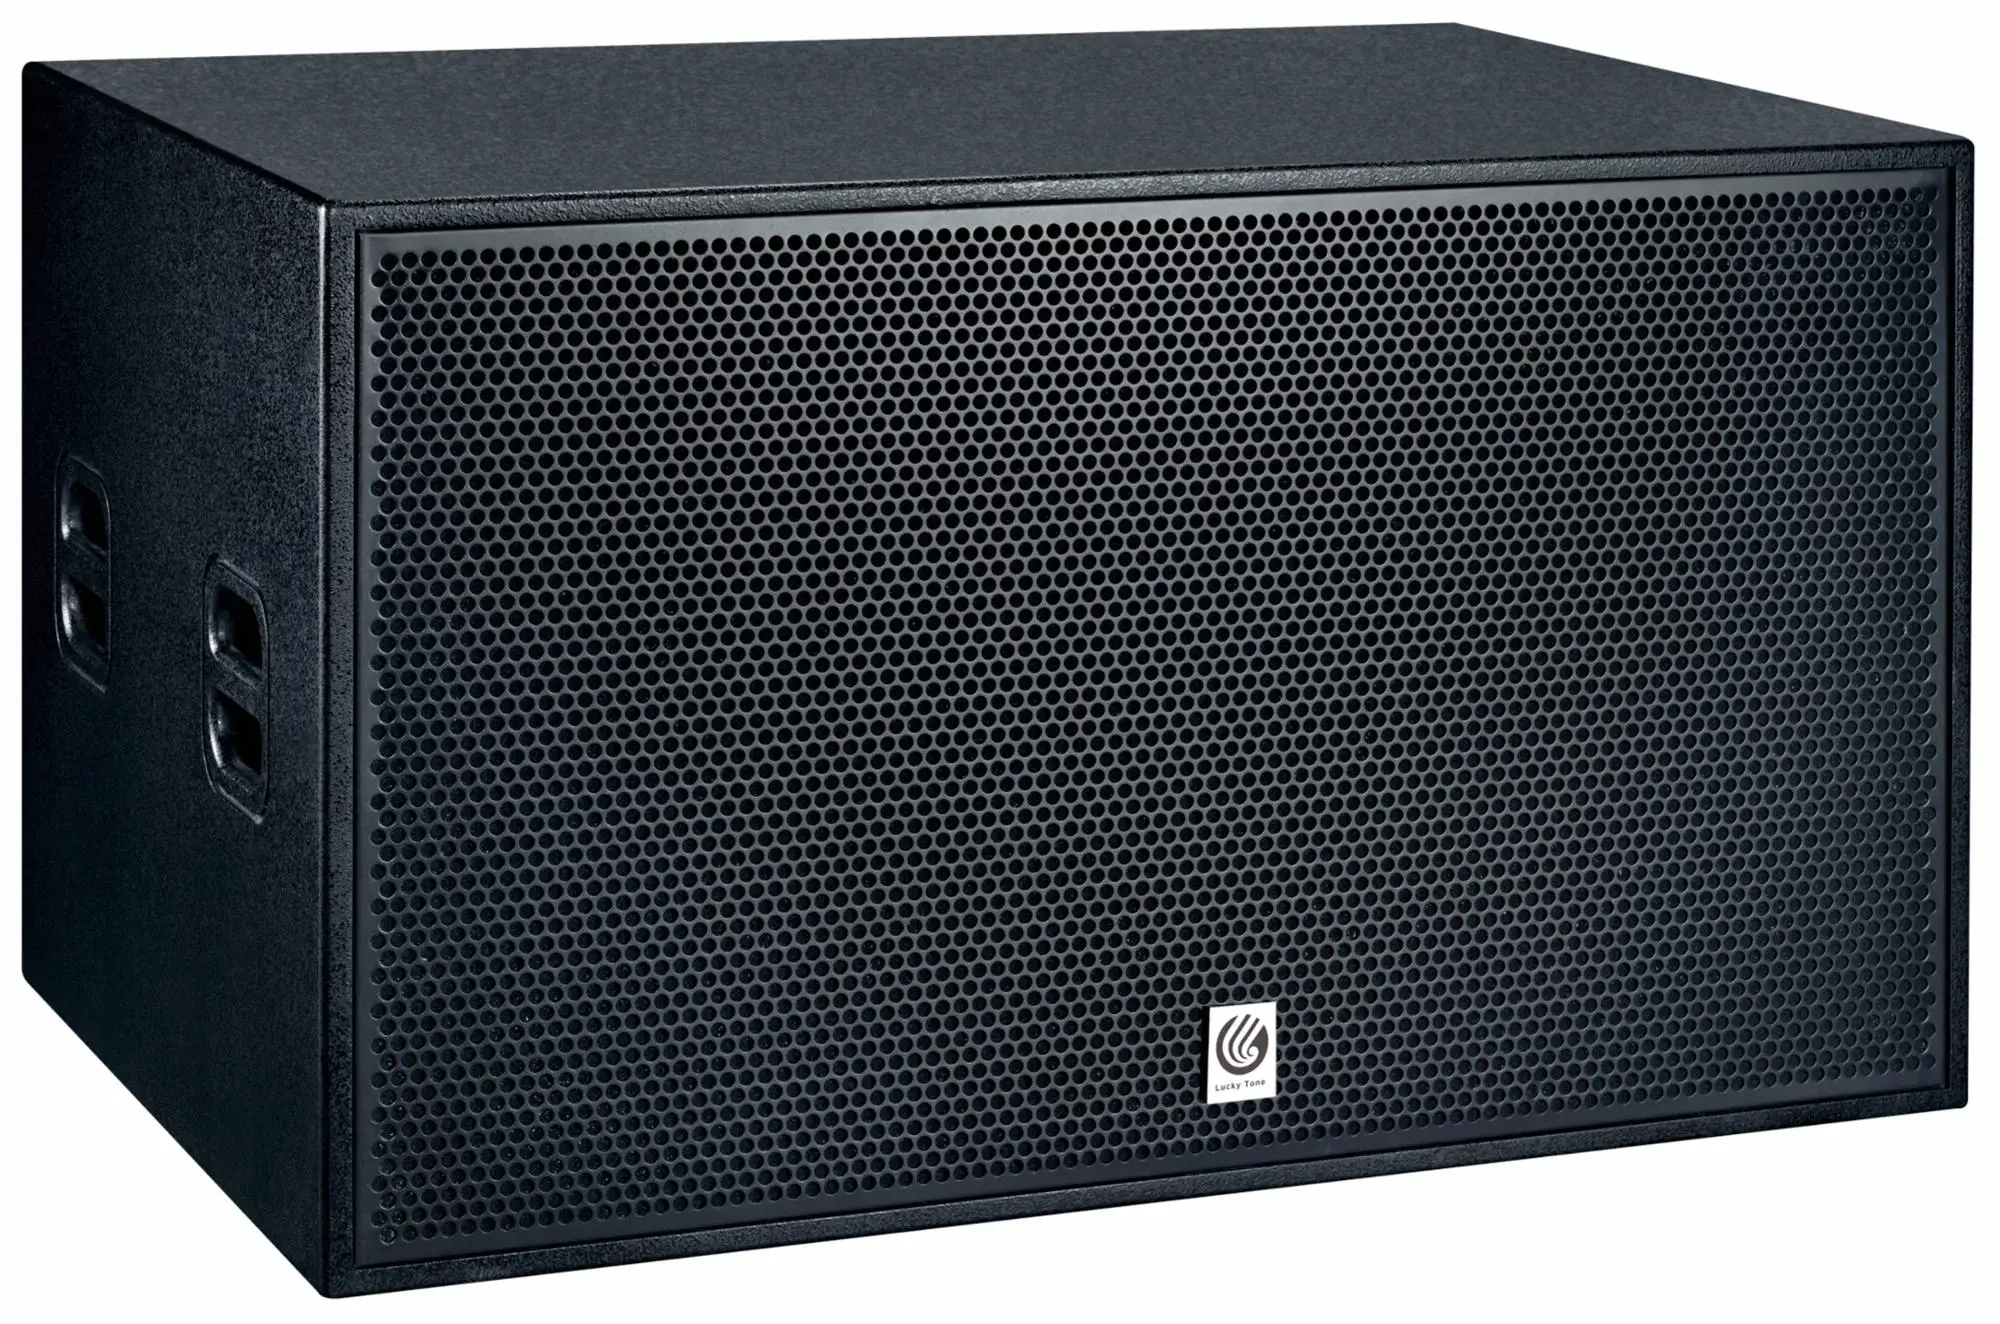 Sub-218 High Power Dual 18 Inch Subwoofer Box Speaker 1500w At 8ohm